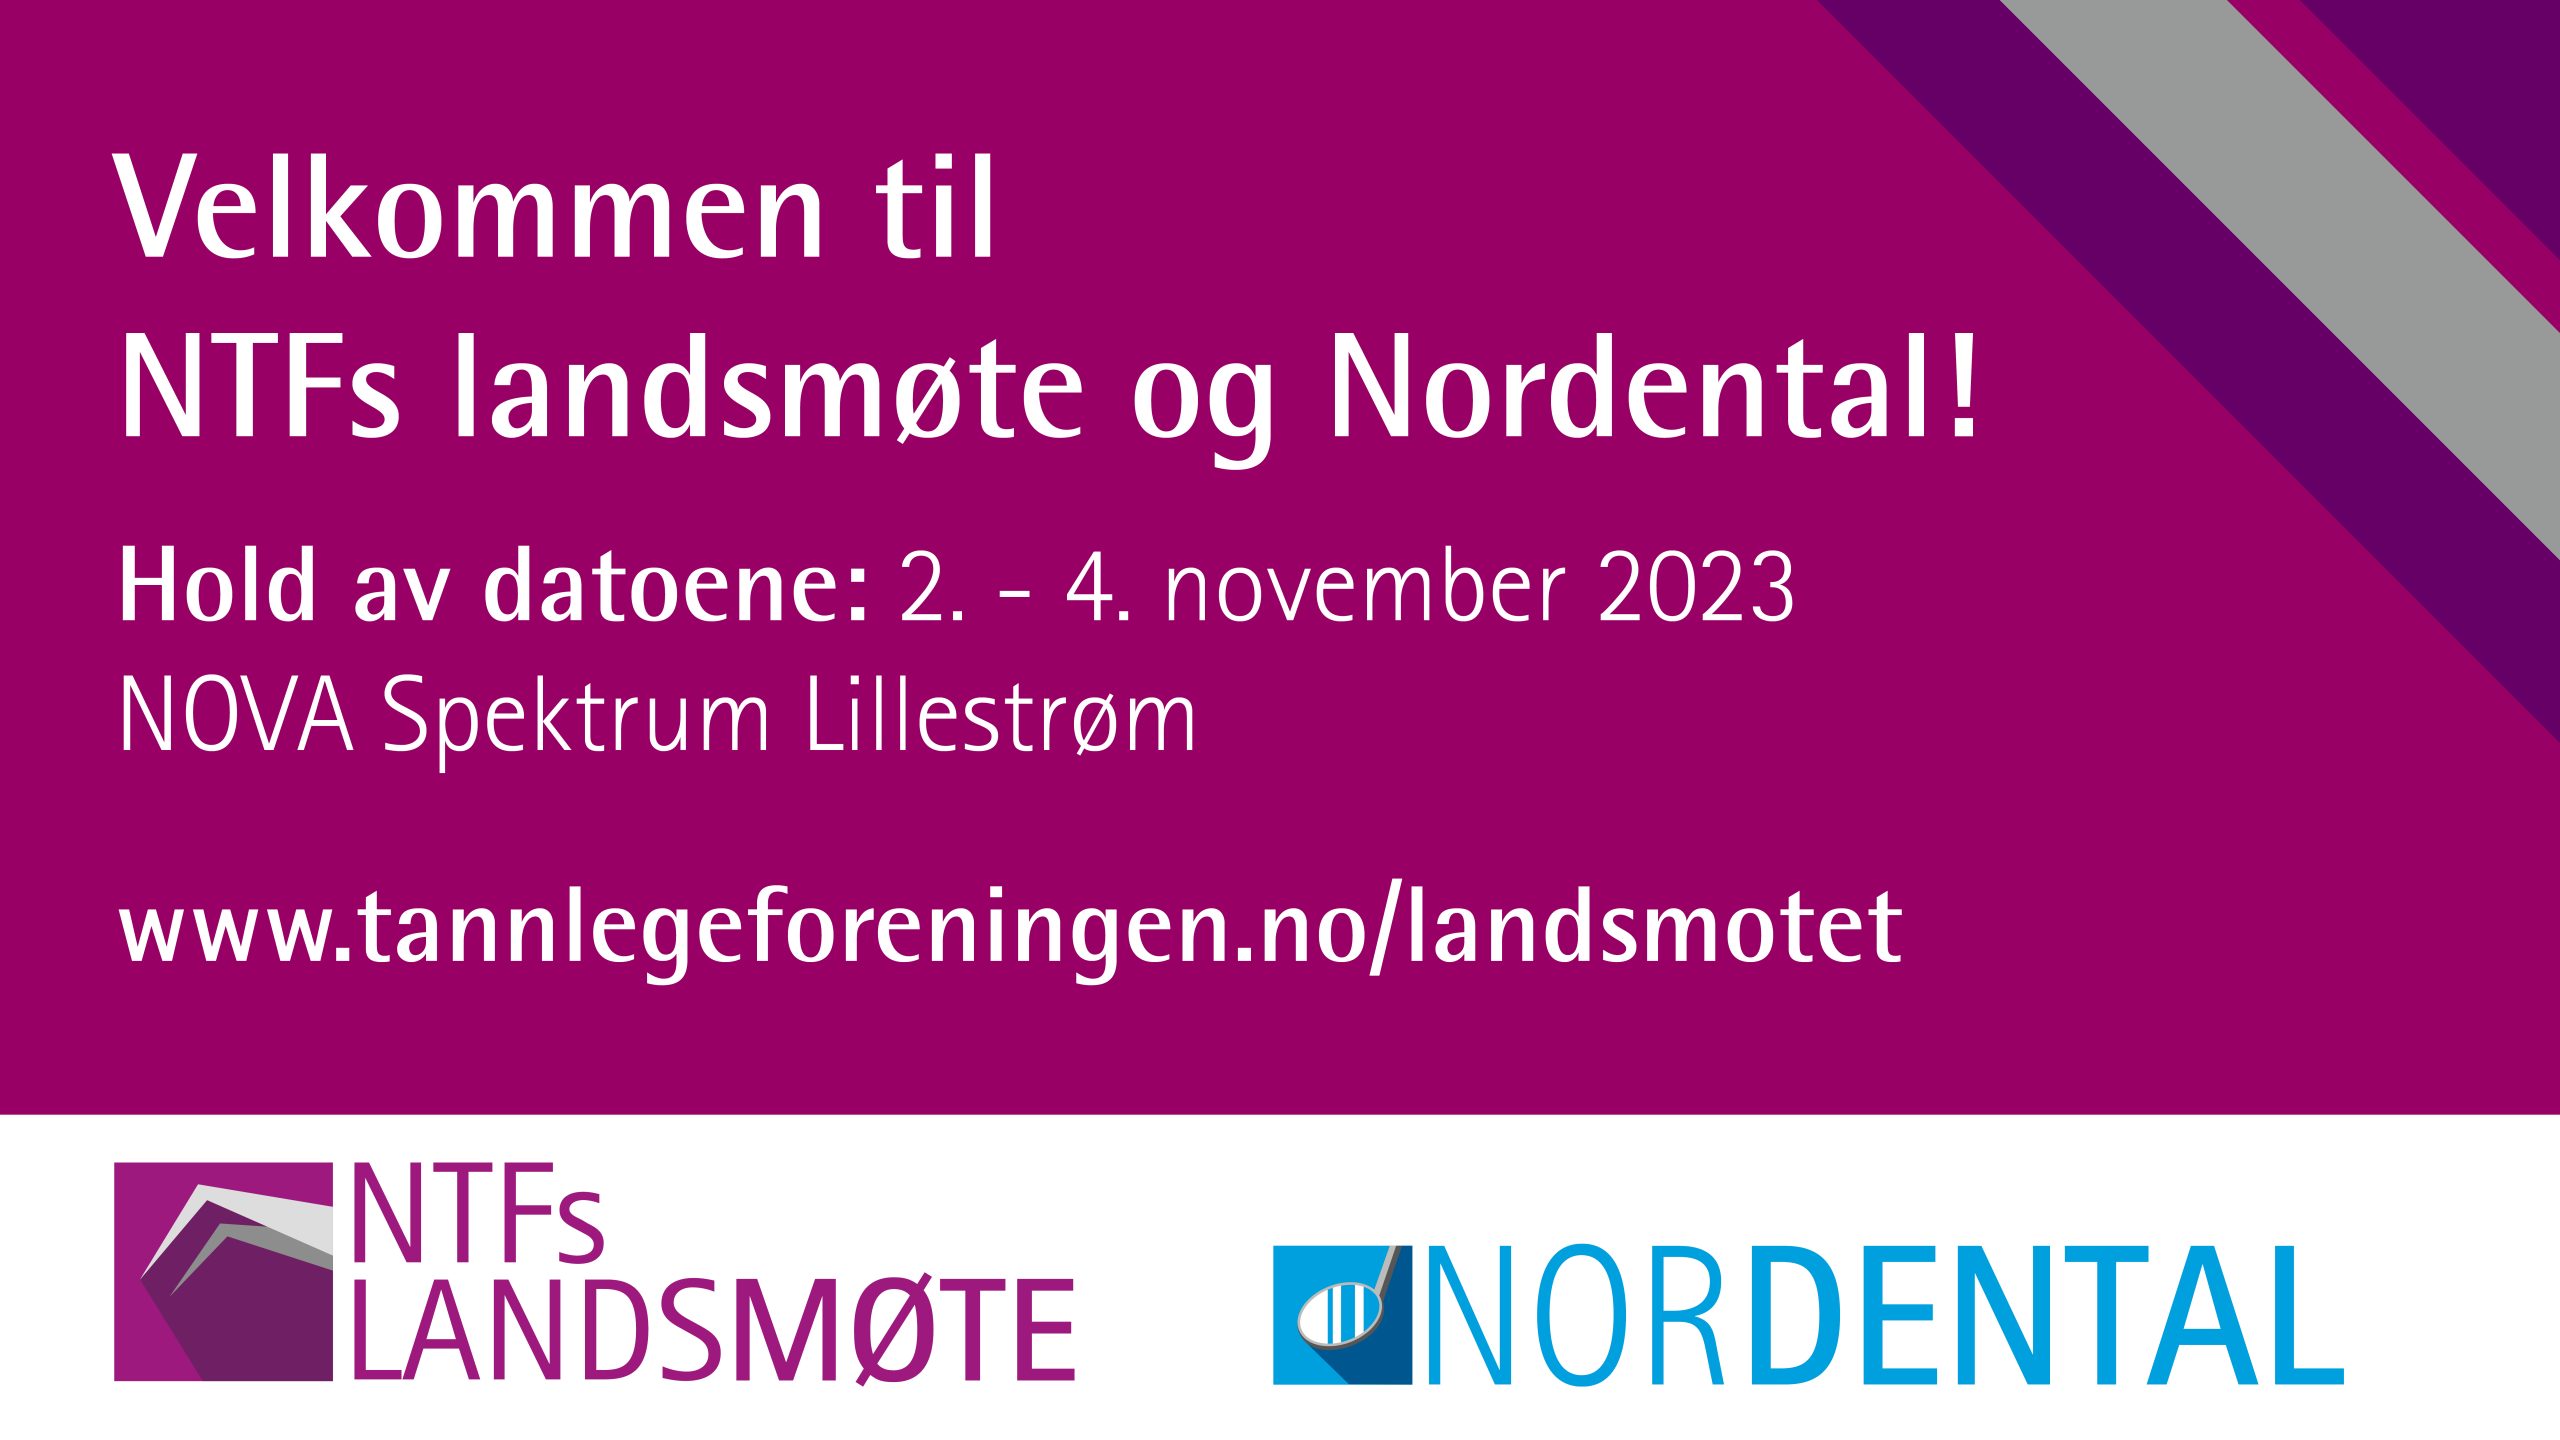 NIOM joins the National Convention and Nordental 2023